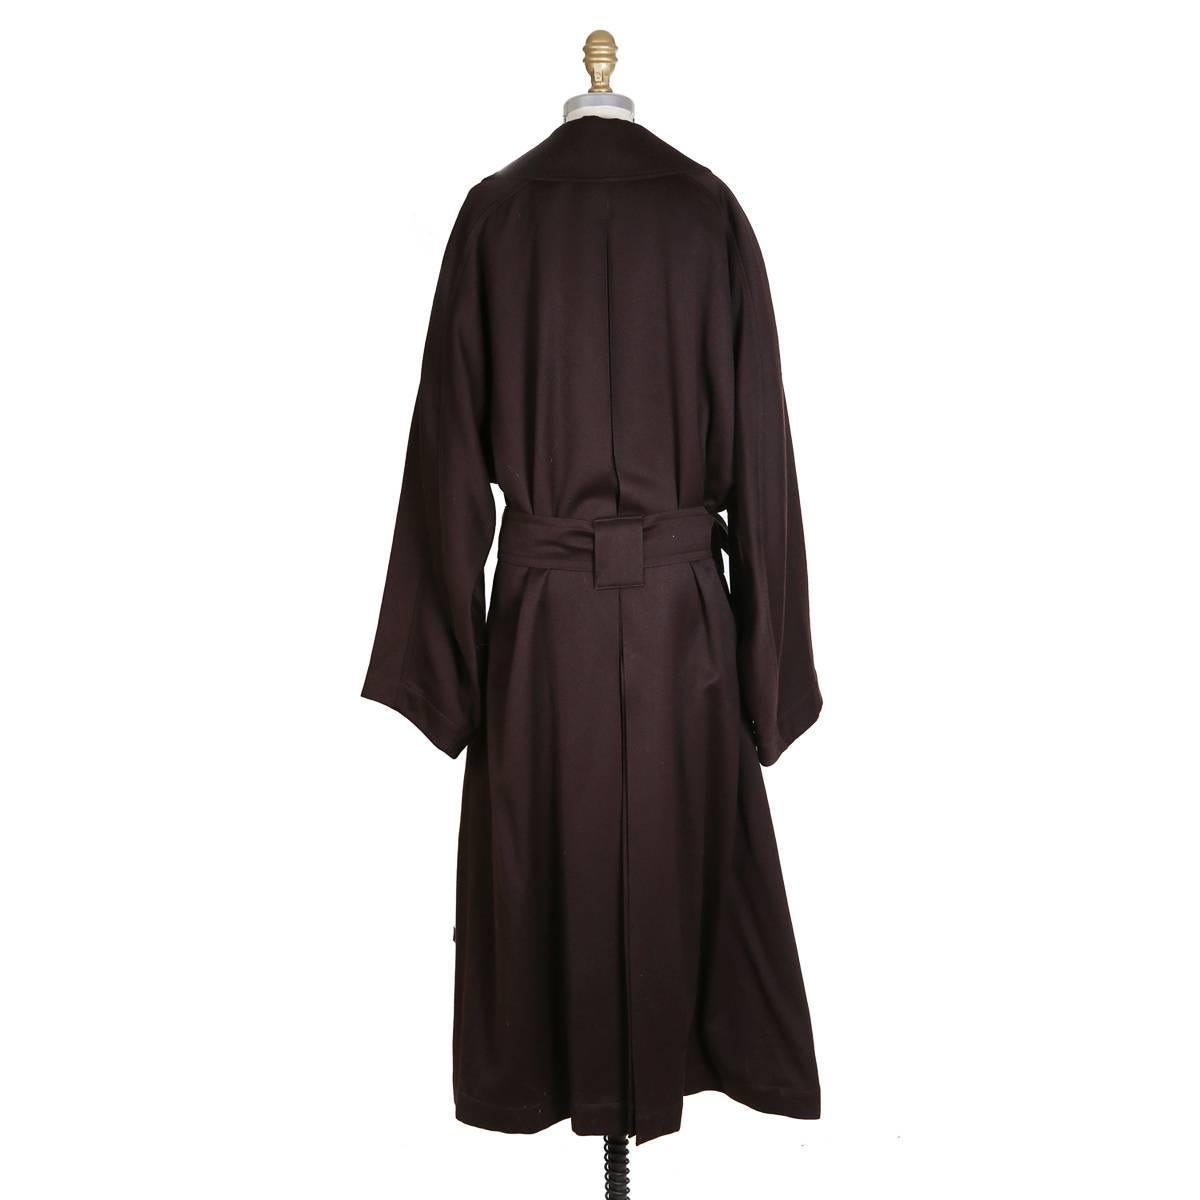 Long winter coat by Azzedine Alaia
Double breasted and includes belt
Dark plum color
Condition: Excellent vintage condition

Size/Measurements:
Size 6
46